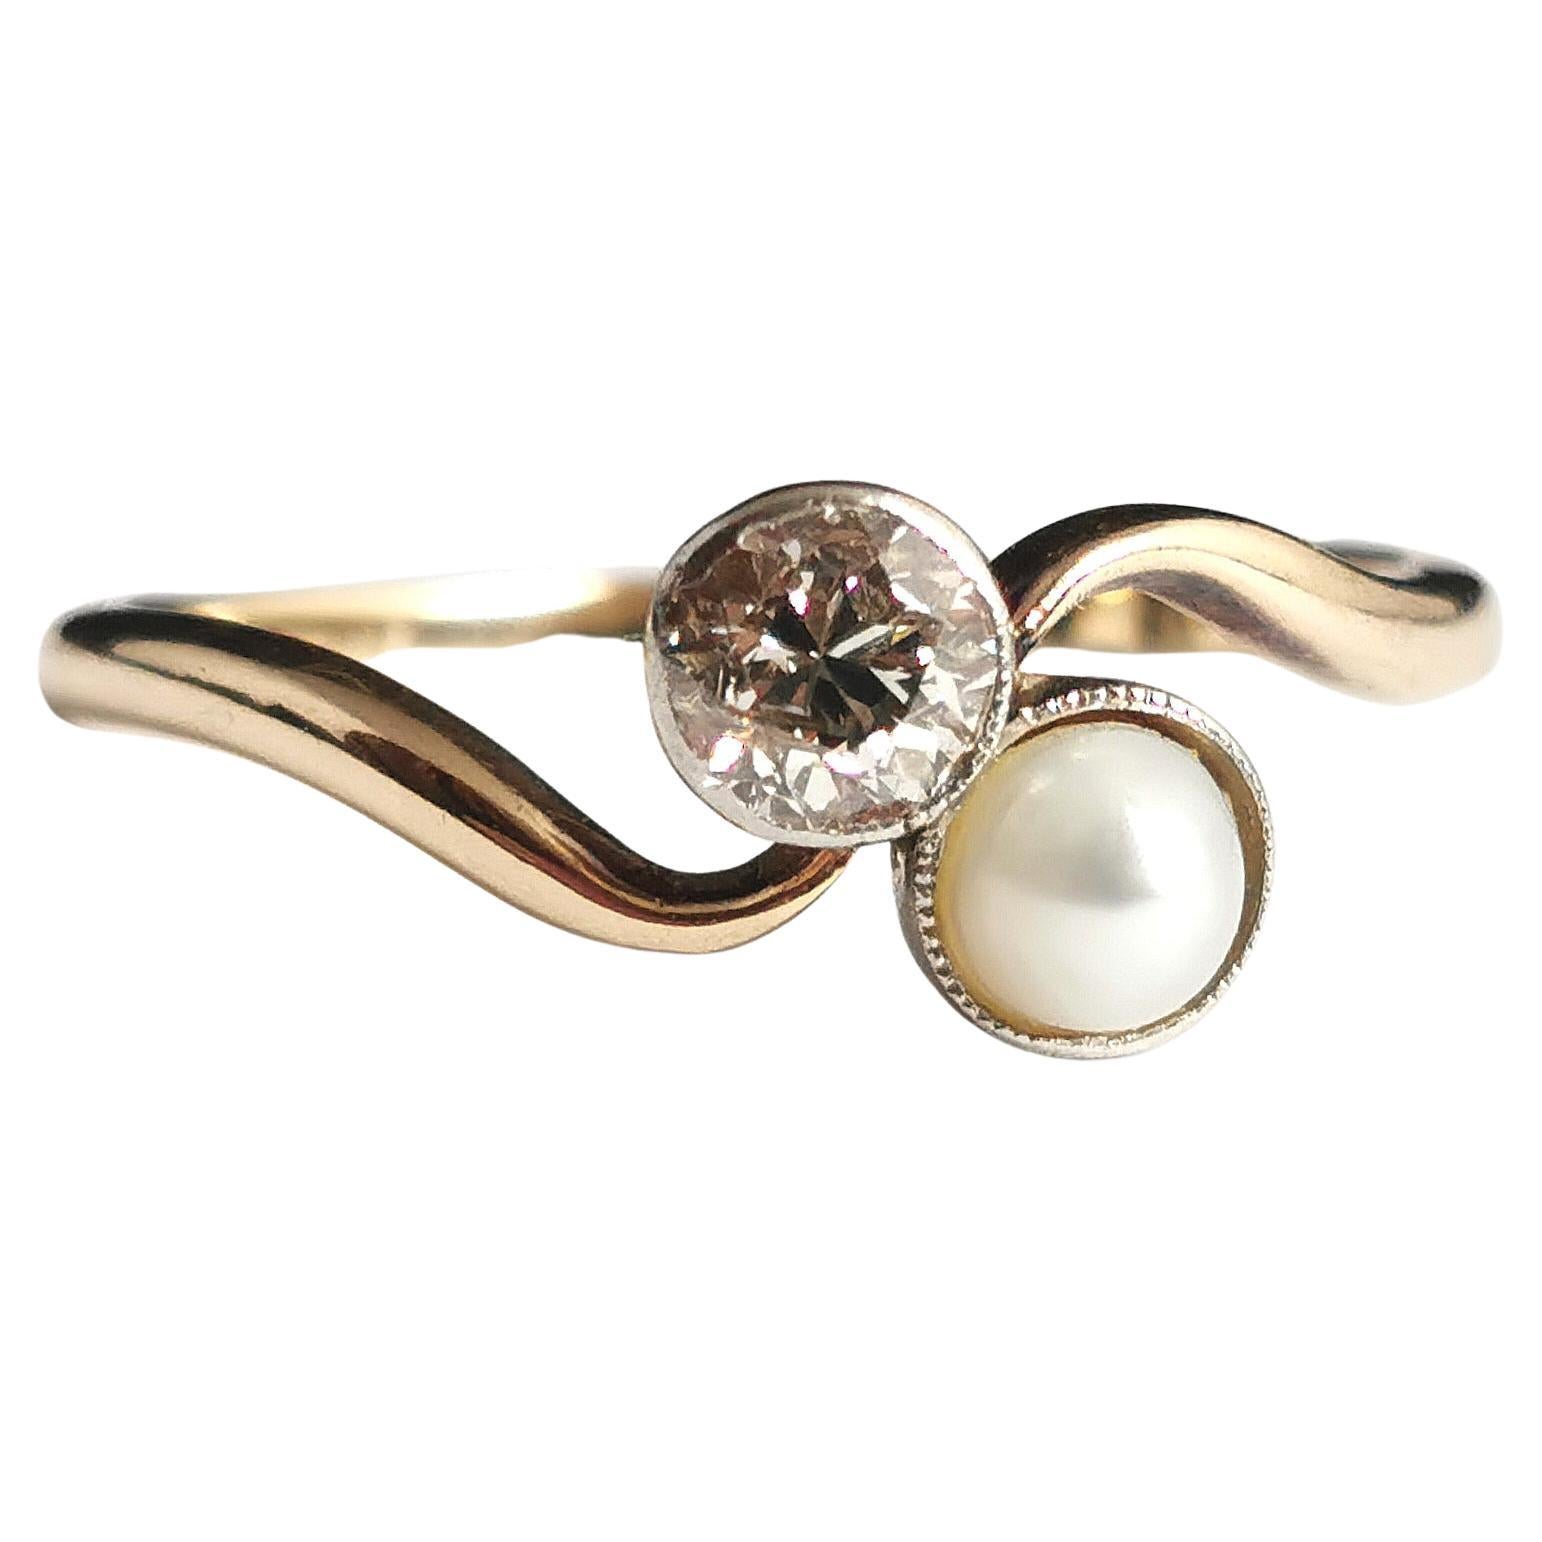 Antique Diamond and Pearl Crossover Ring, 18k Gold, Toi Et Moi